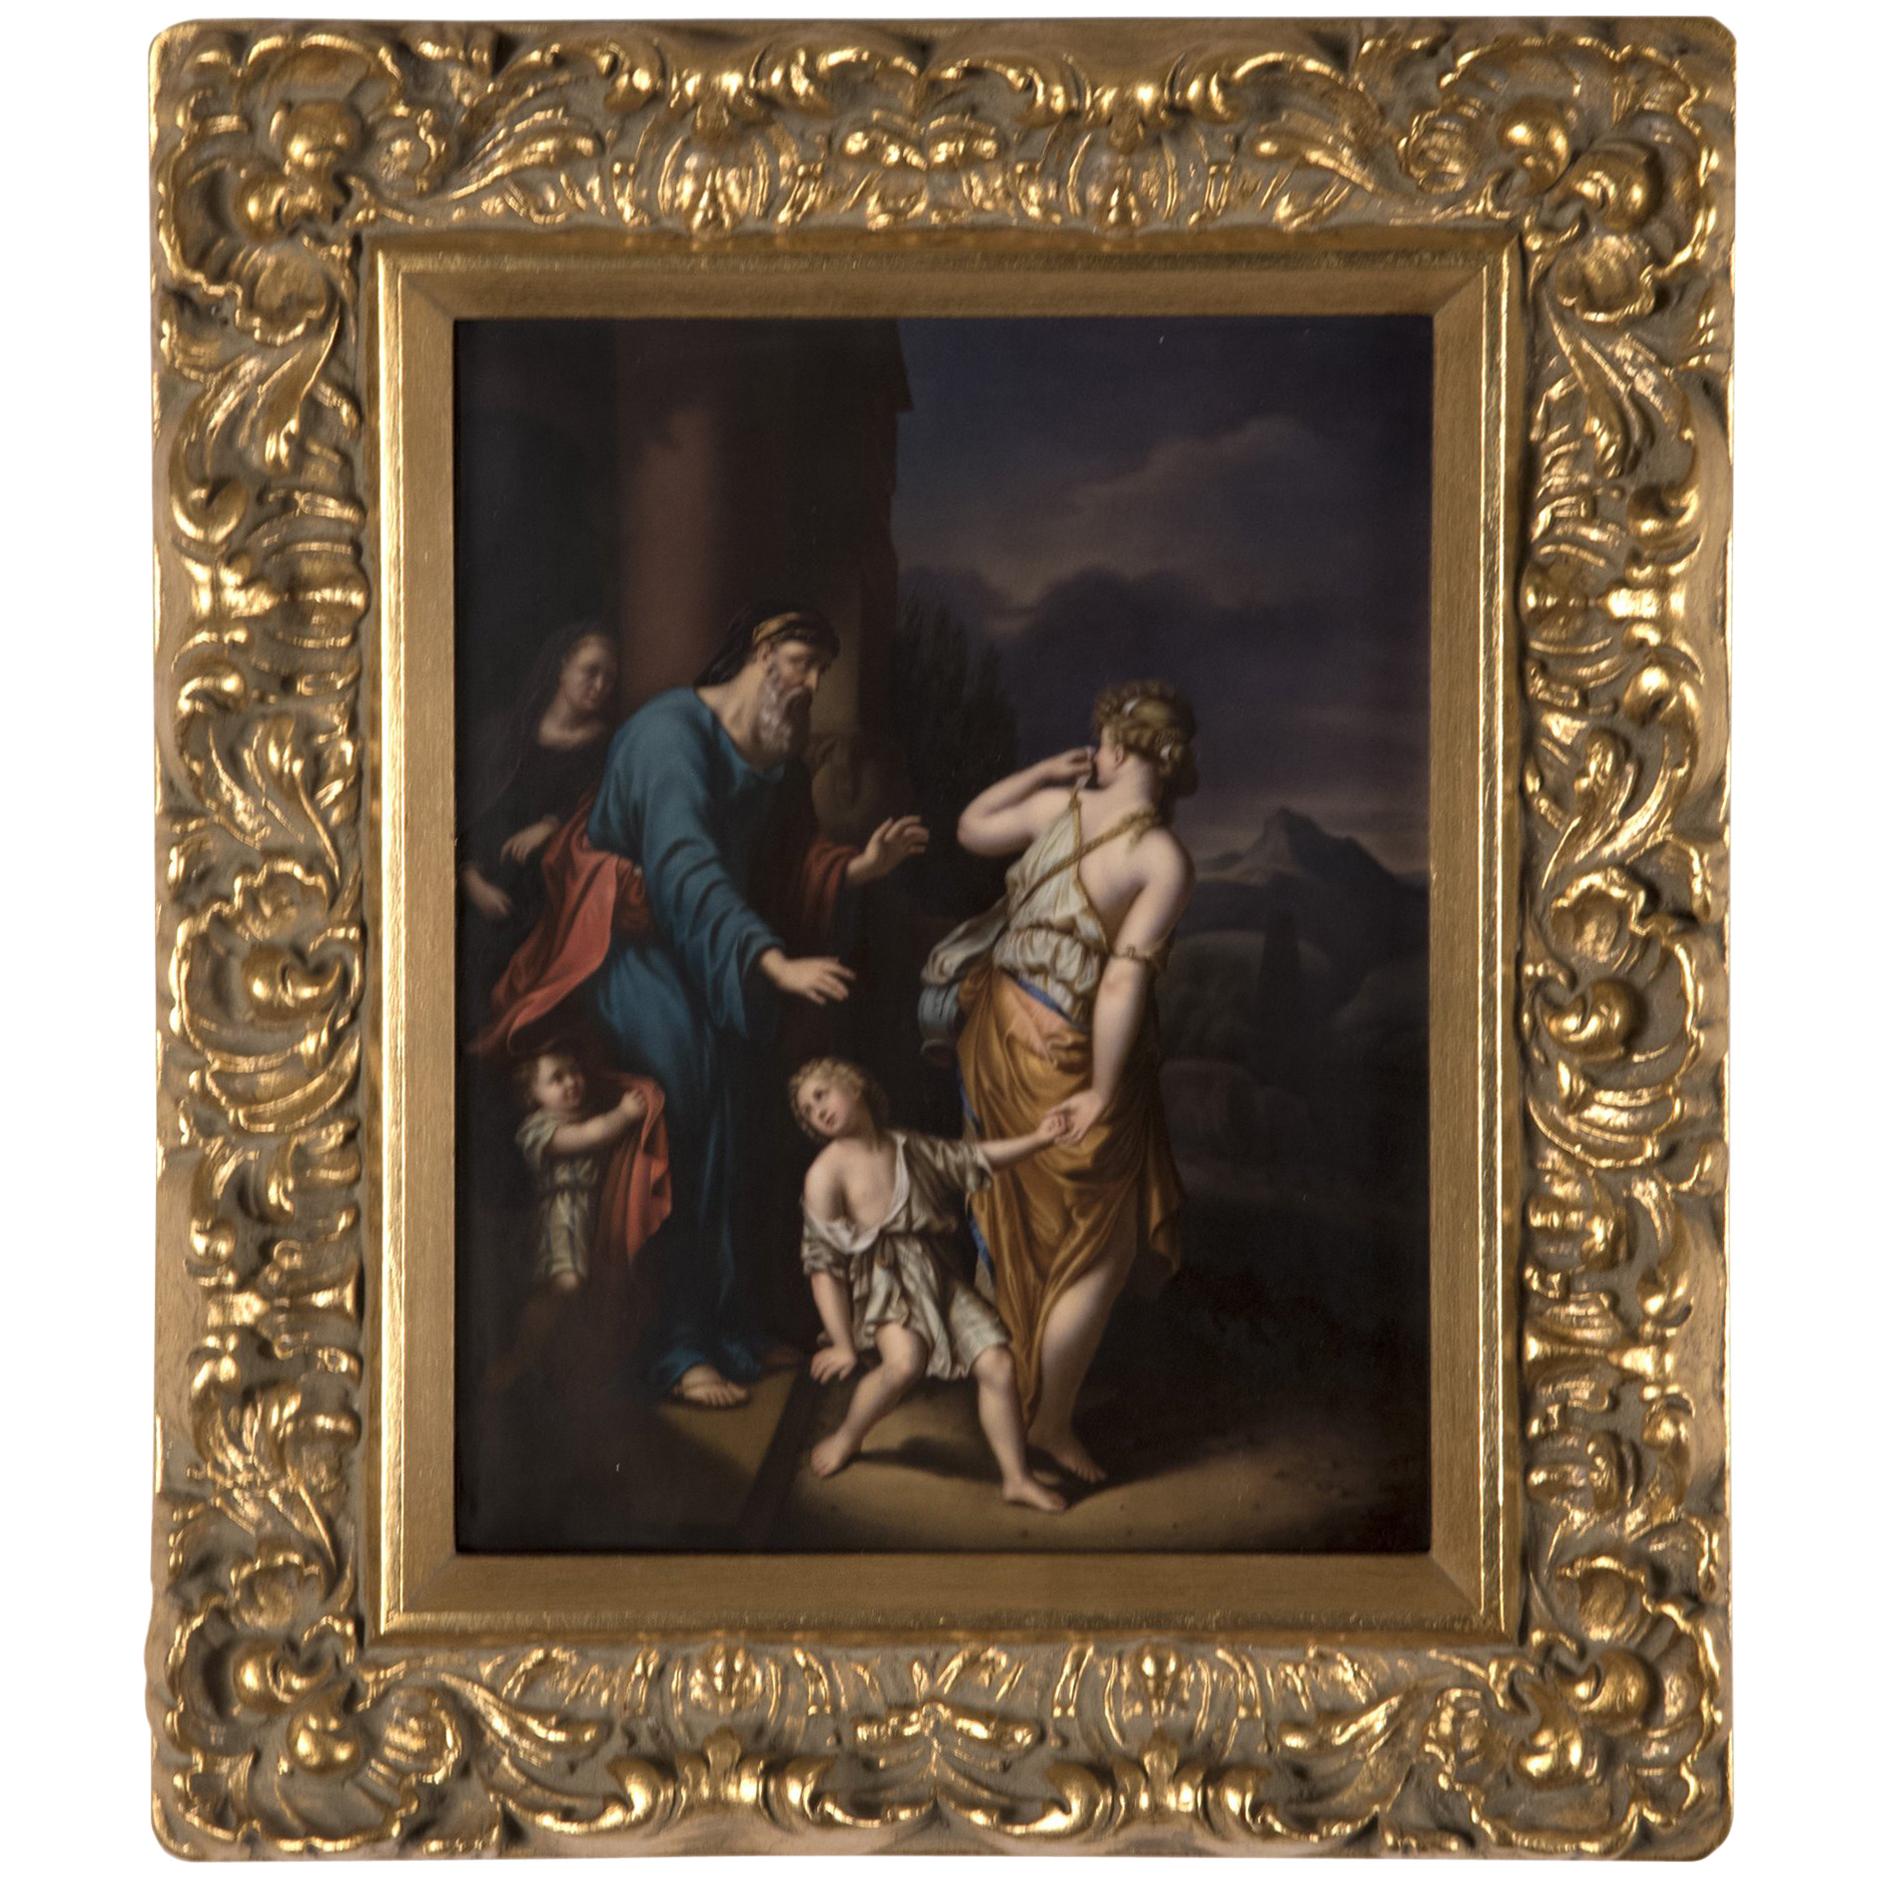 KPM Porcelain Plaque of Hagar and Ishmael Banished from the House of Abraham